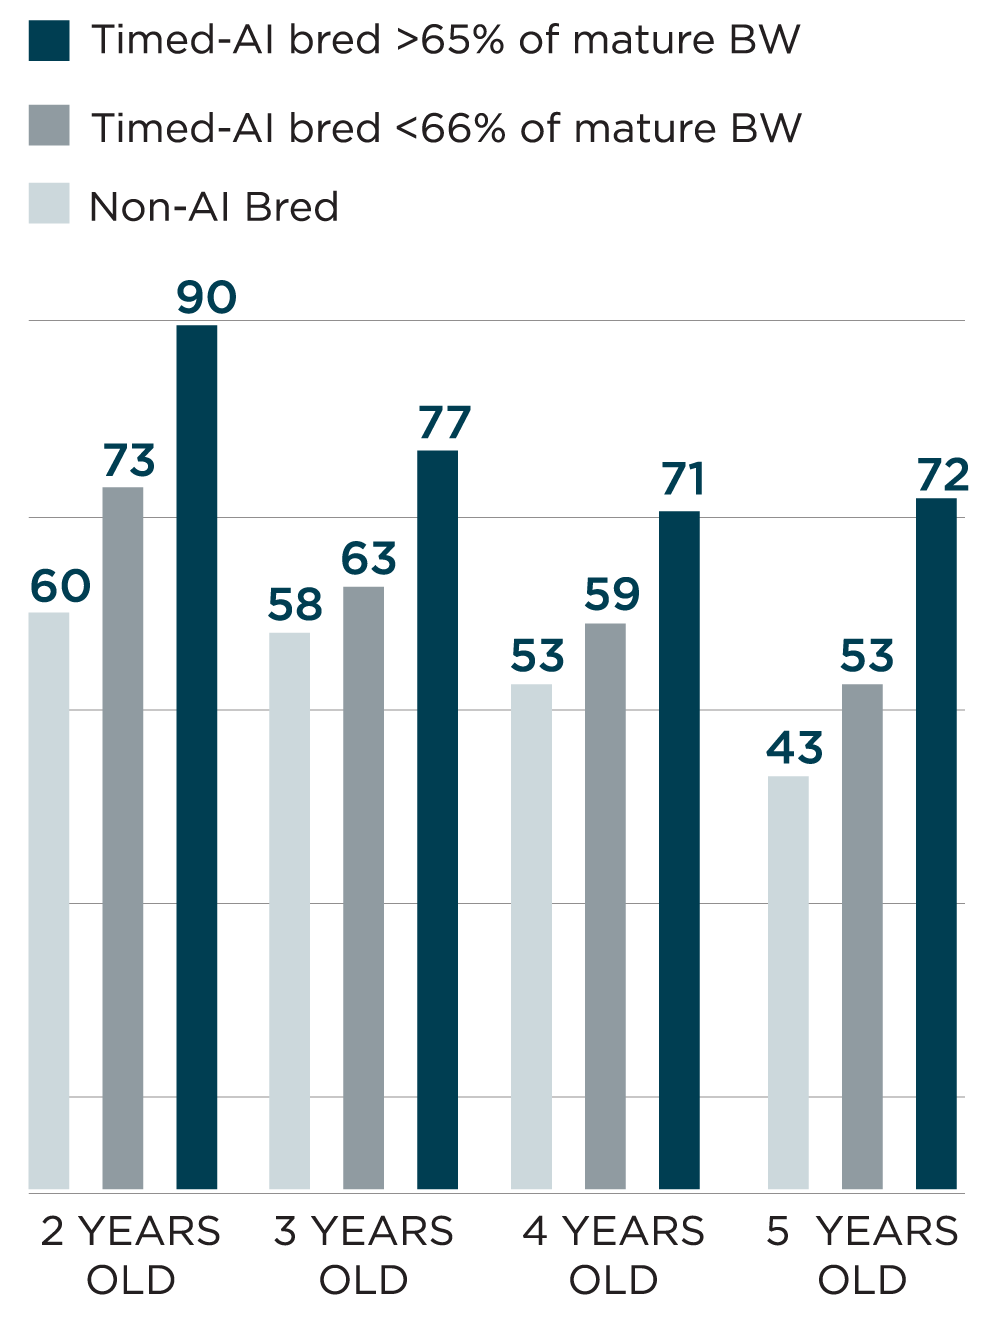 Figure 1: Percentage of Timed-AI or natural service bred replacement heifers following the first breeding season retained in the herd thru 5 years of age.